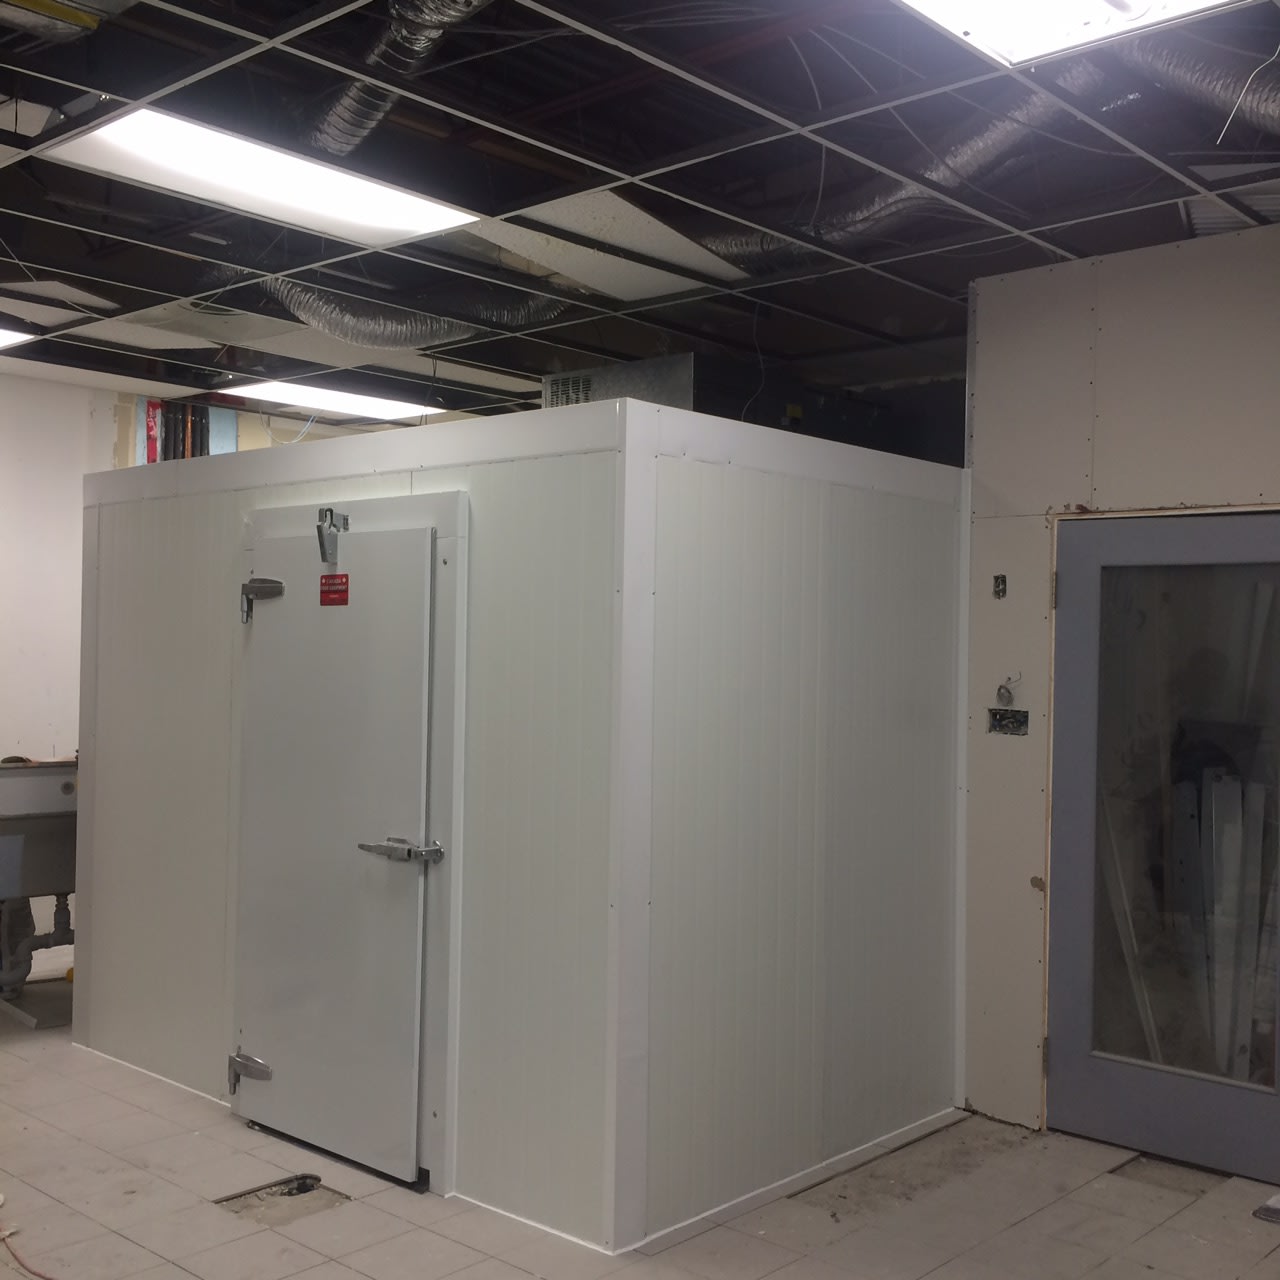 6x8x8H Walk-In Cooler - Self Contained (NEW) - C688SDNSC